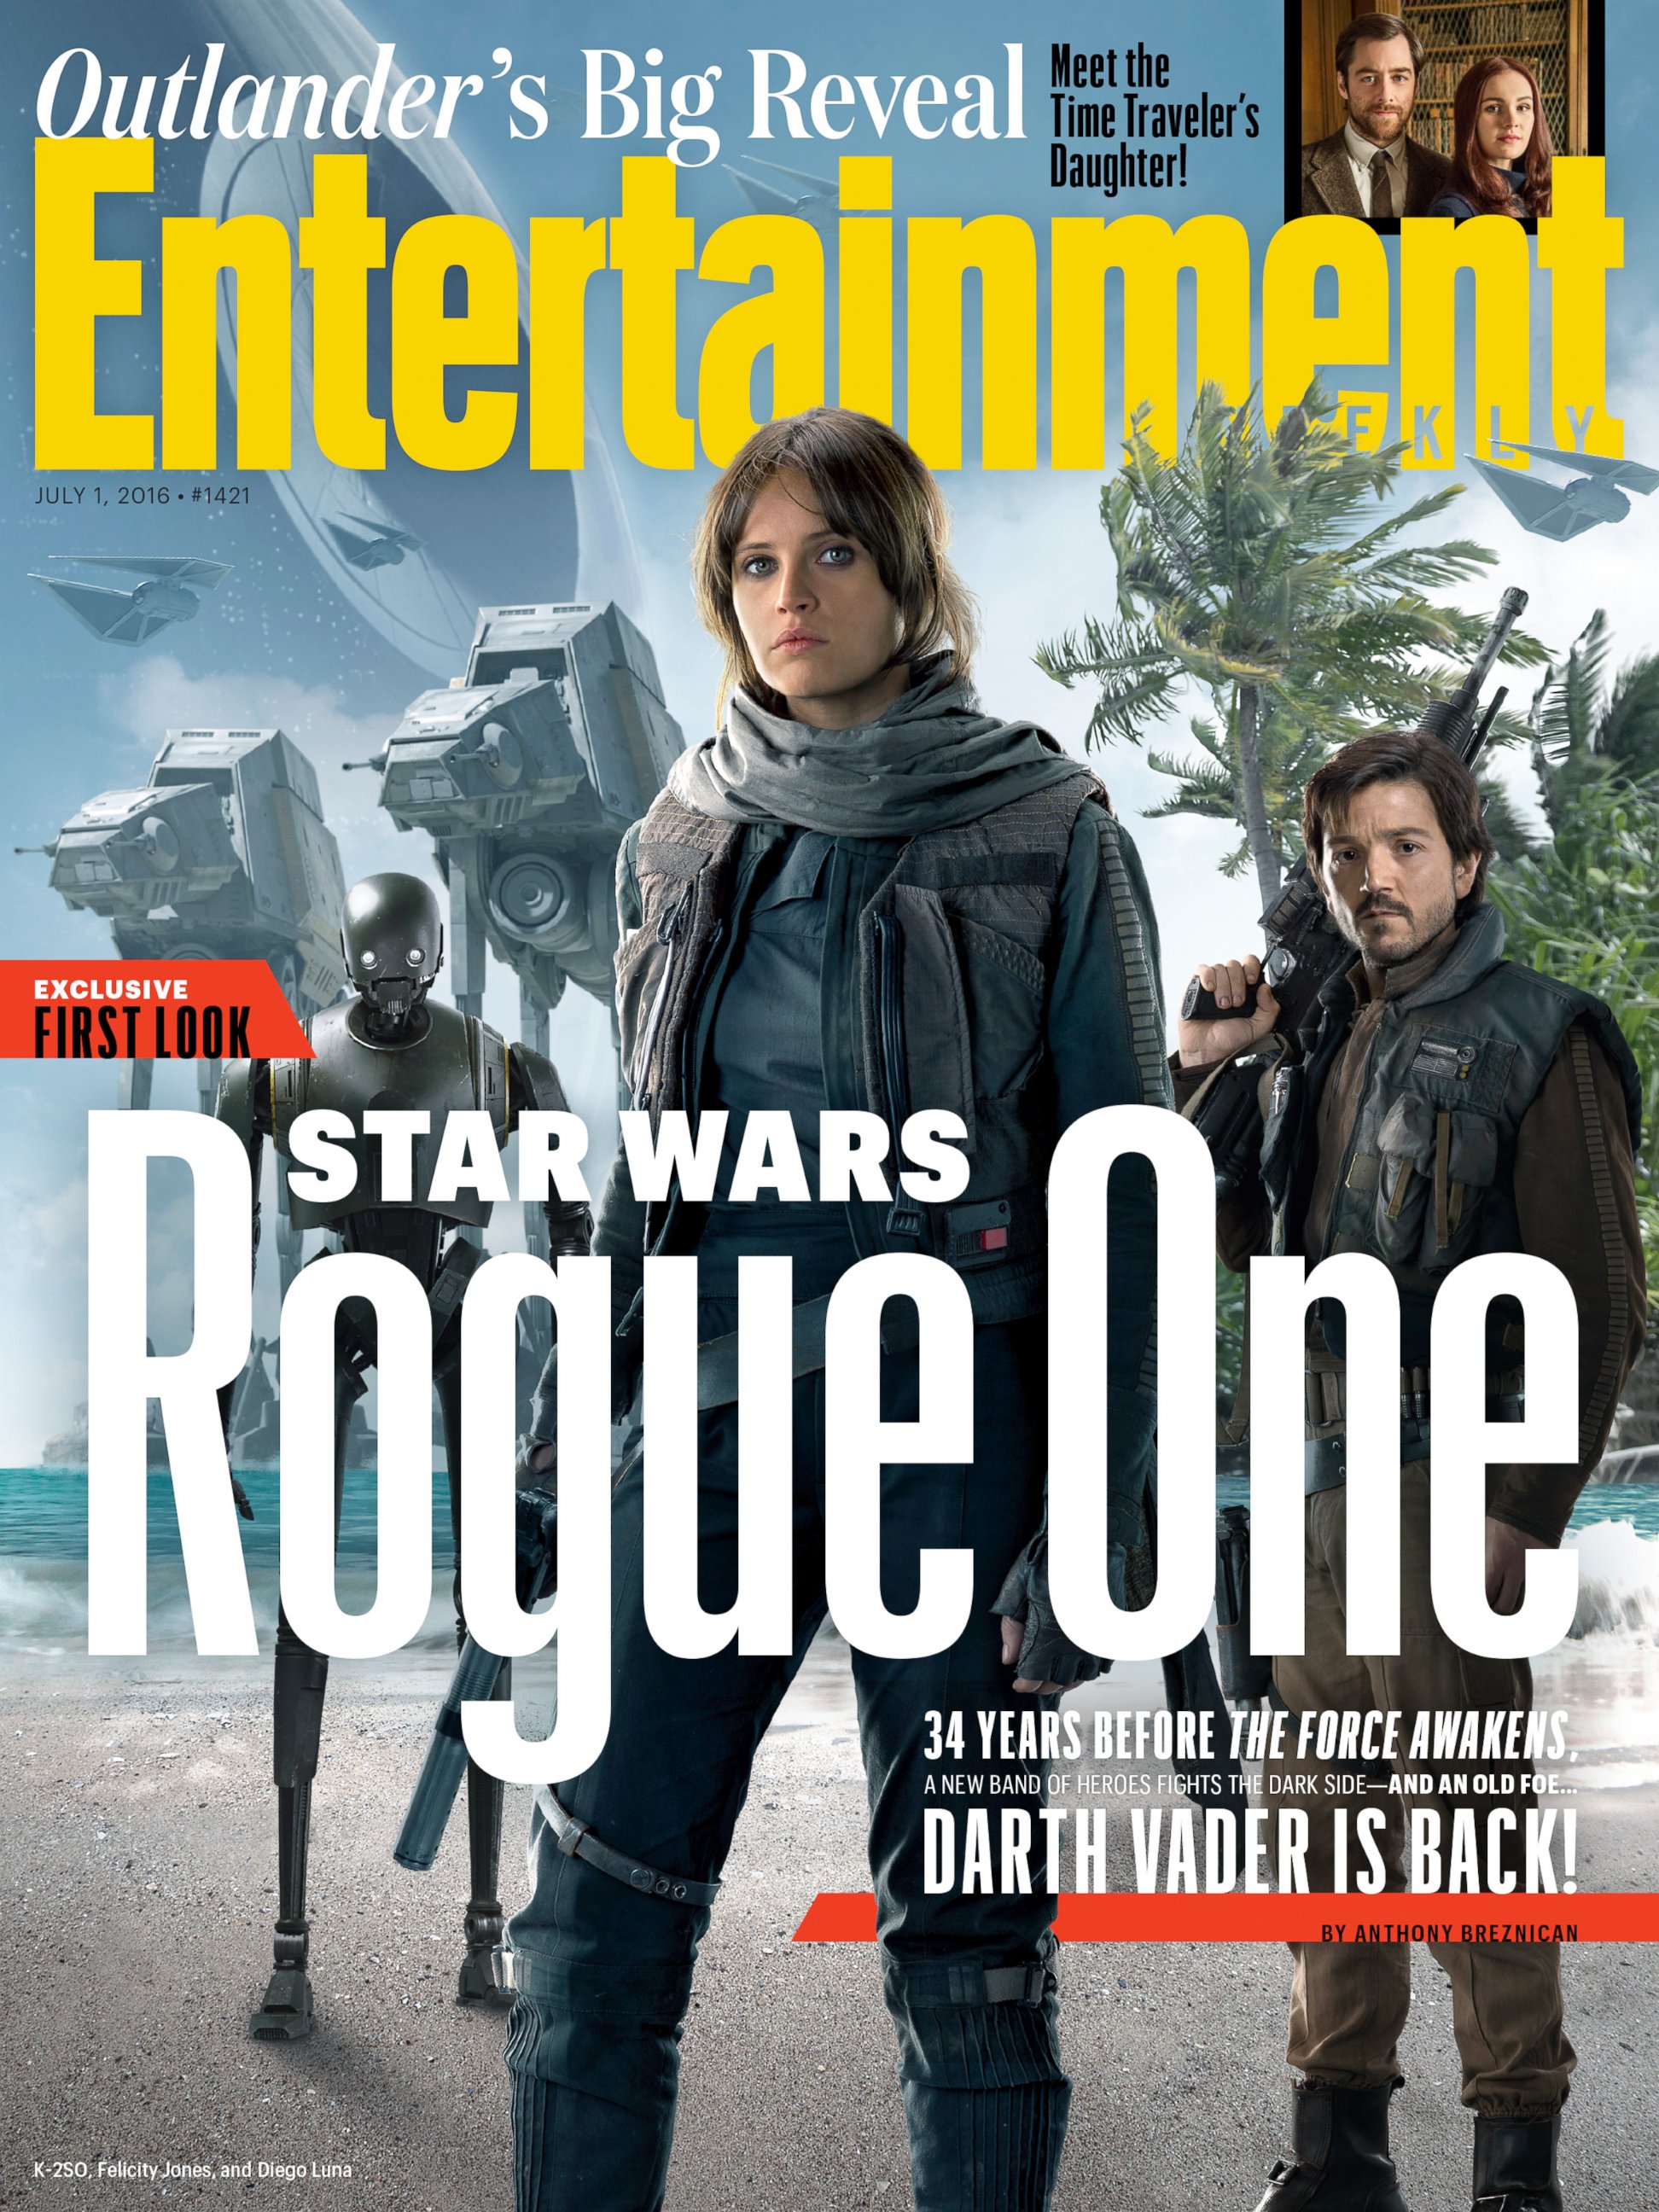 PHOTO: Entertainment Weekly magazine has an exclusive first look at "Rogue One: A Star Wars Story." The issue goes on sale nationwide Friday, June 24.